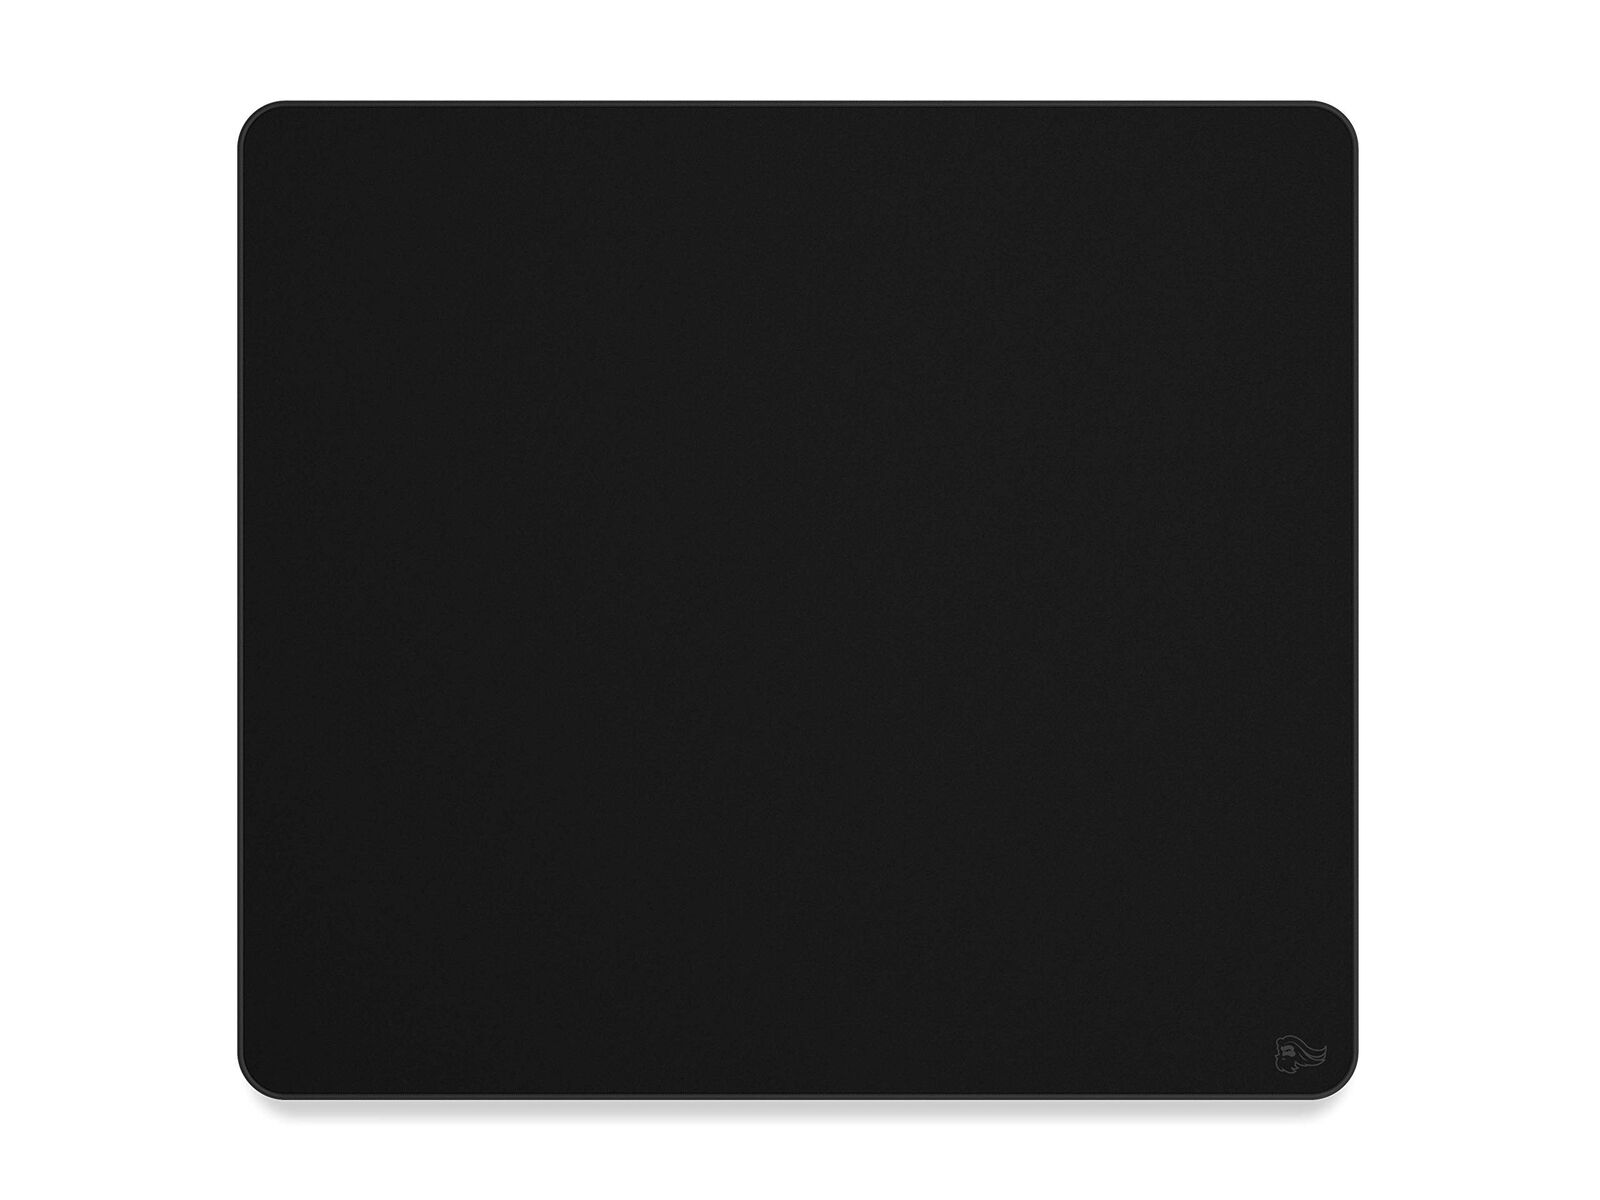 Glorious XL Heavy Gaming Mouse Mat/Pad - Stealth Edition - Extra 5mm Thick,